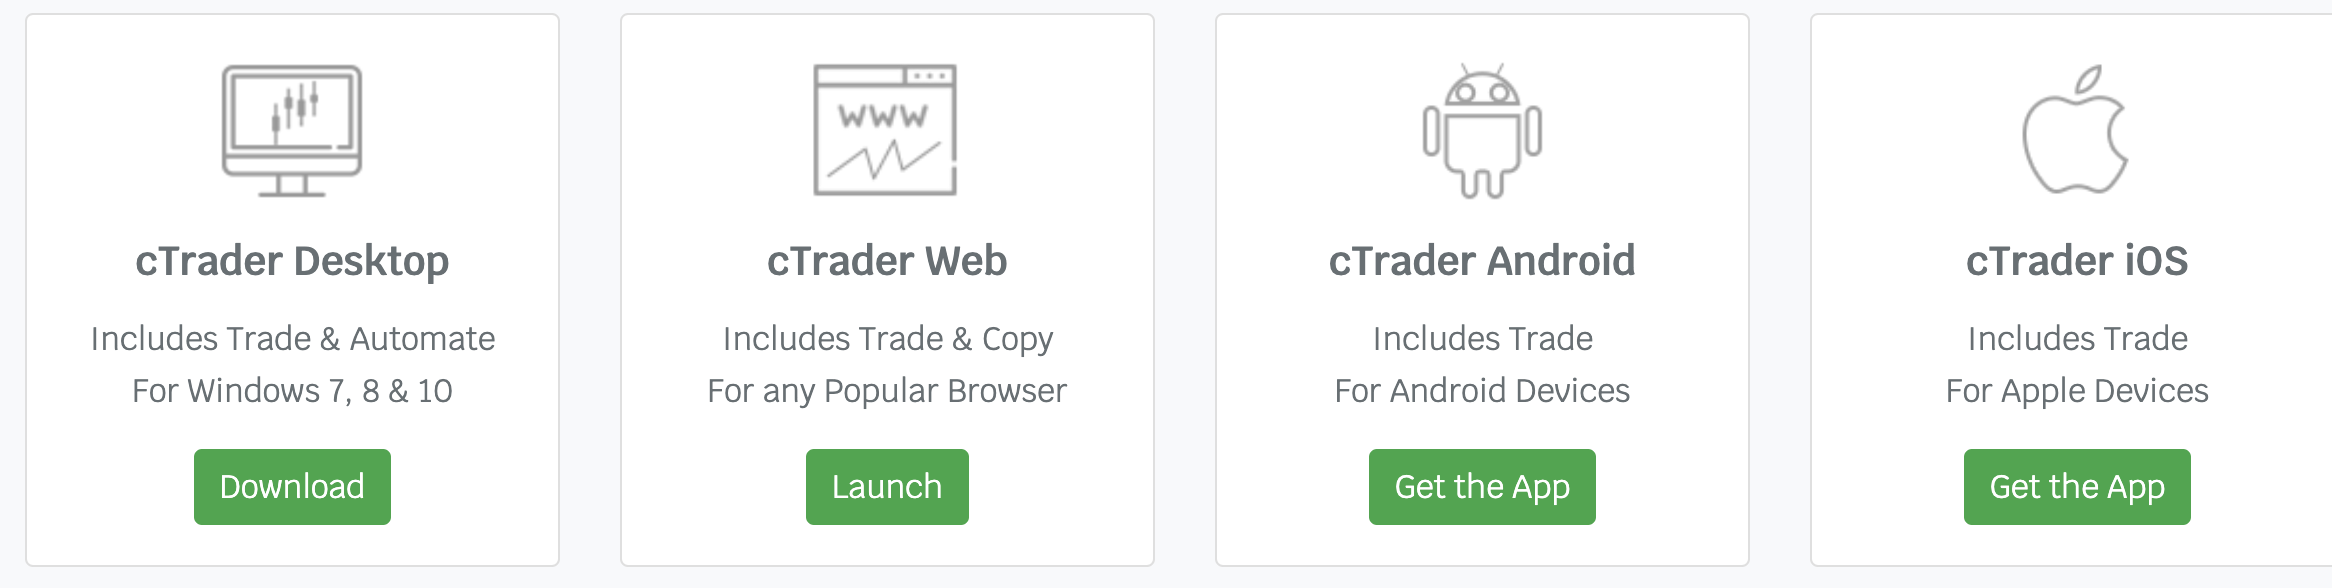 cTrader on different devices, such as Desktop, Web, Android and iOS